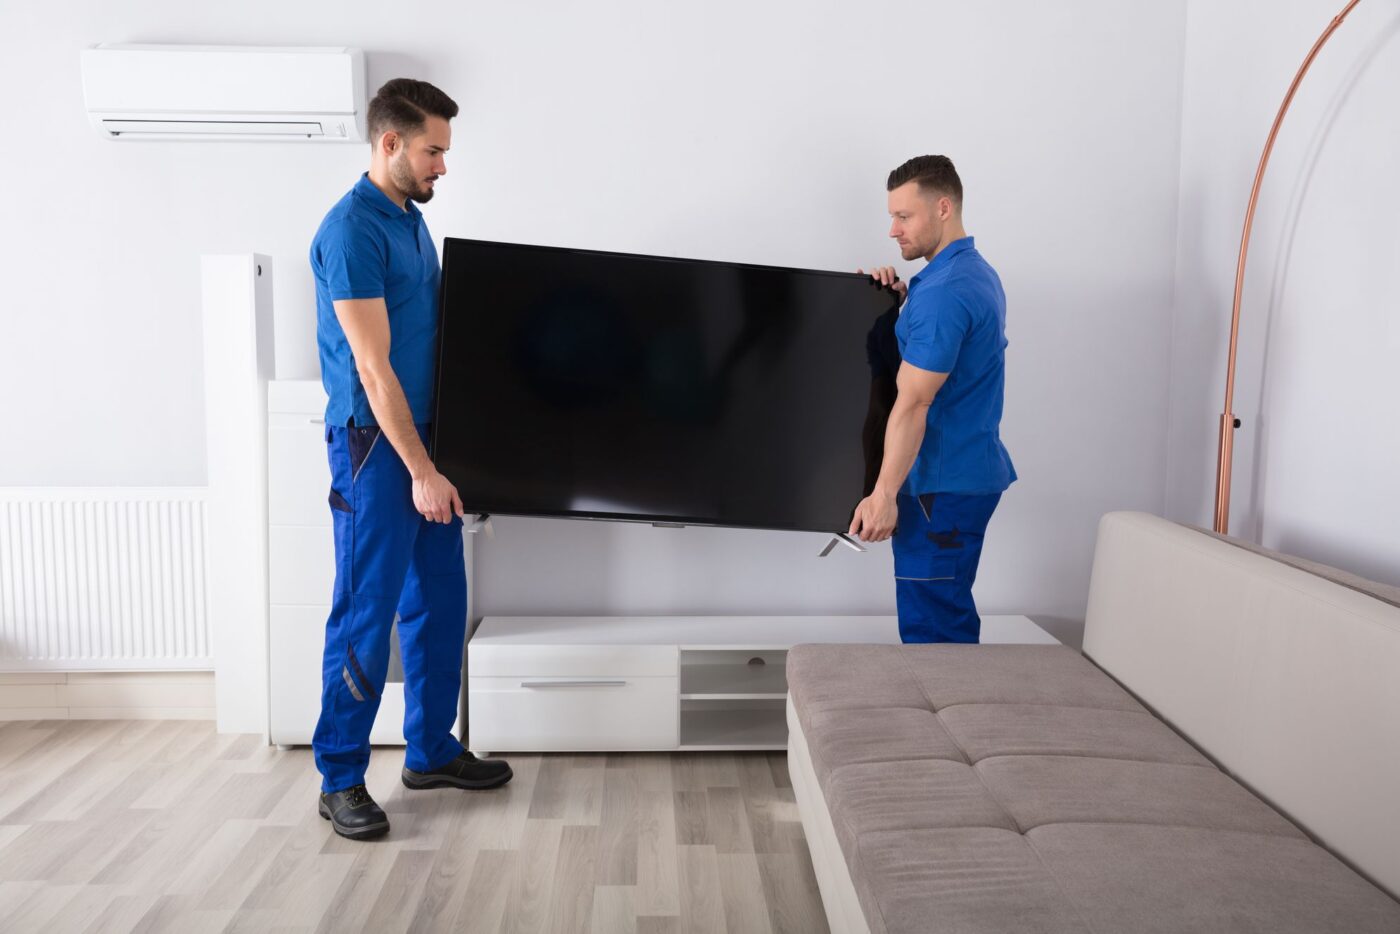 Professional movers relocating a TV